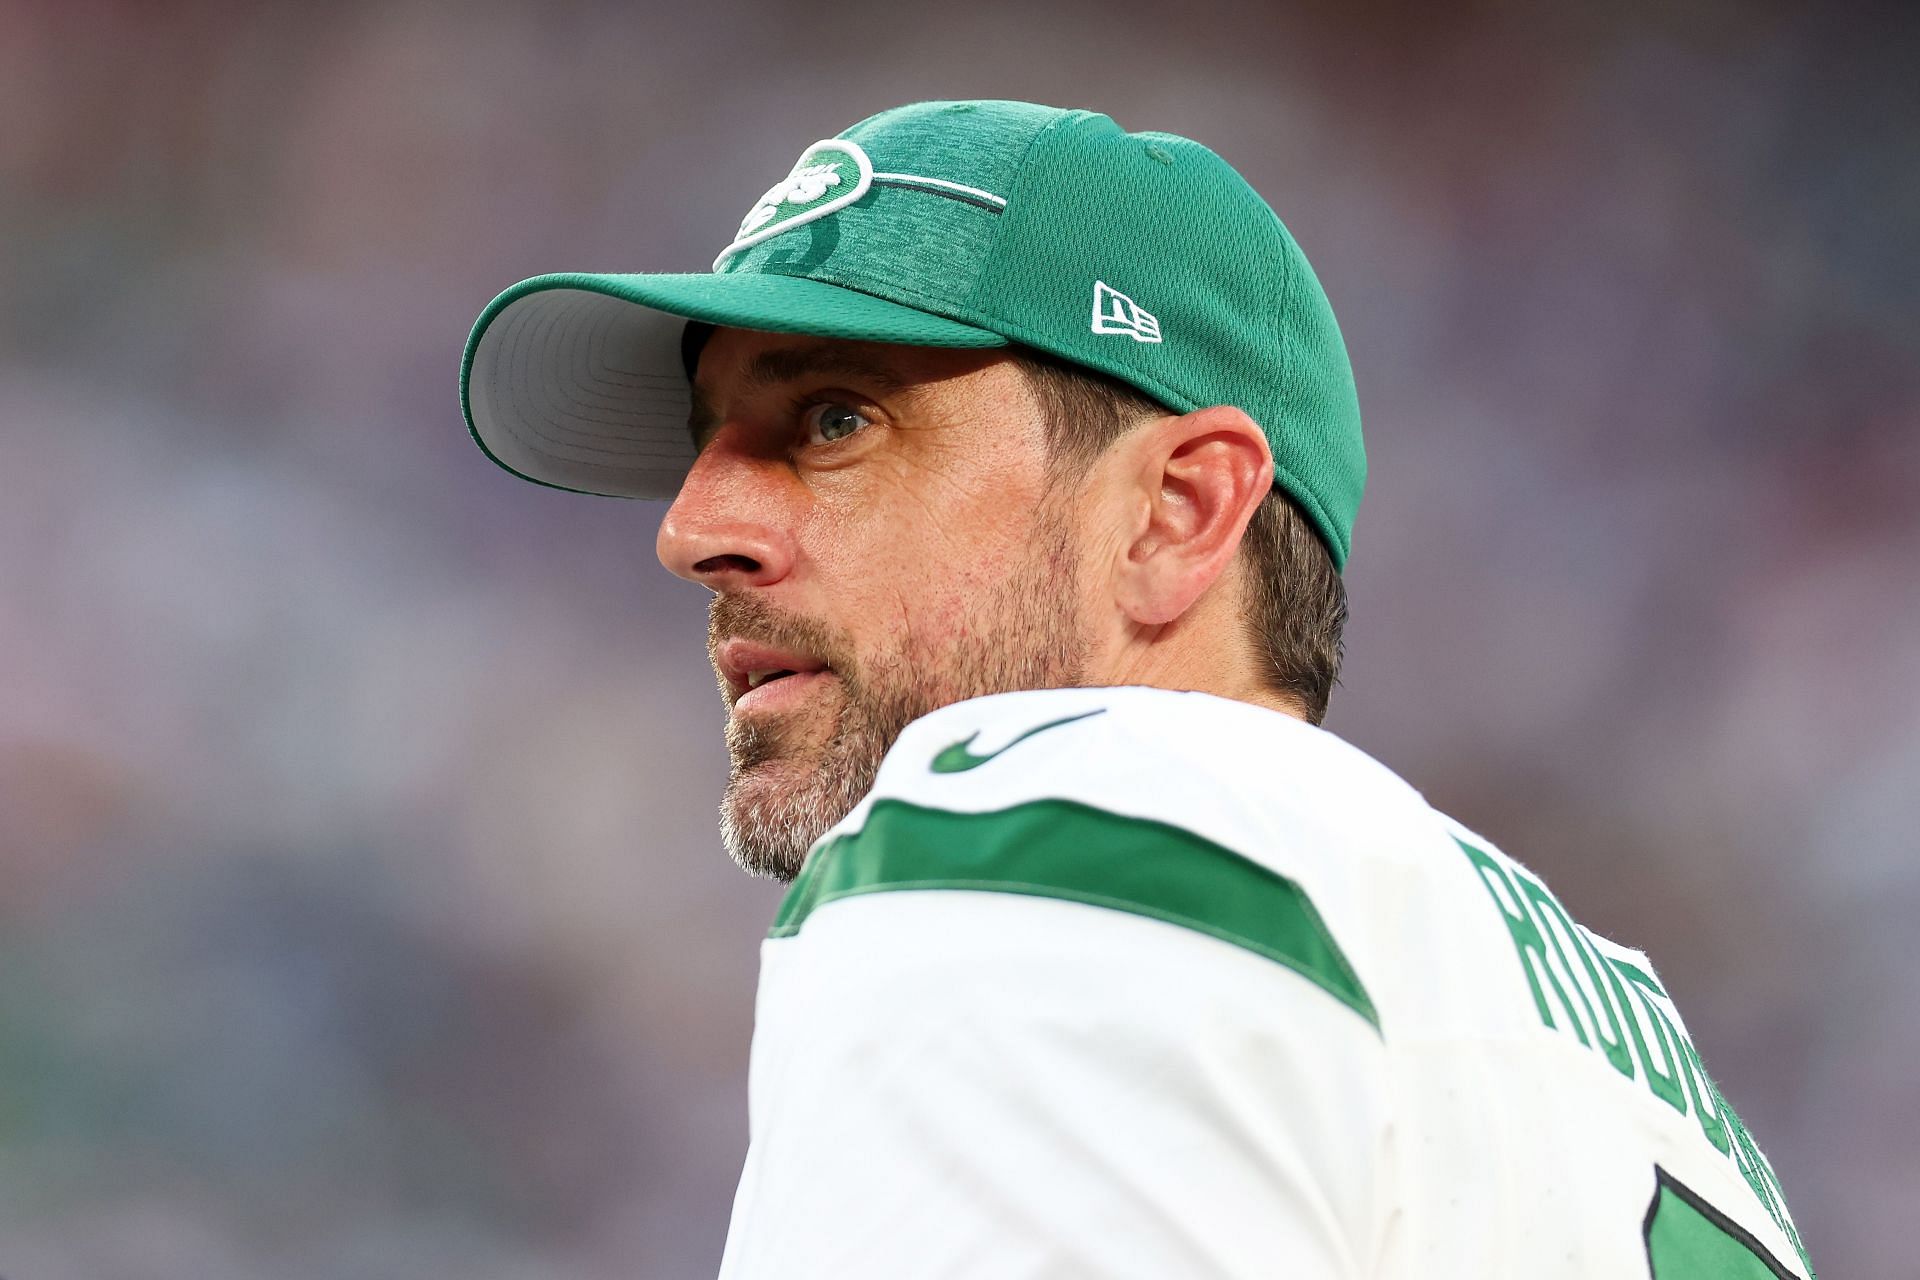 Aaron Rodgers at New York Jets v New York Giants